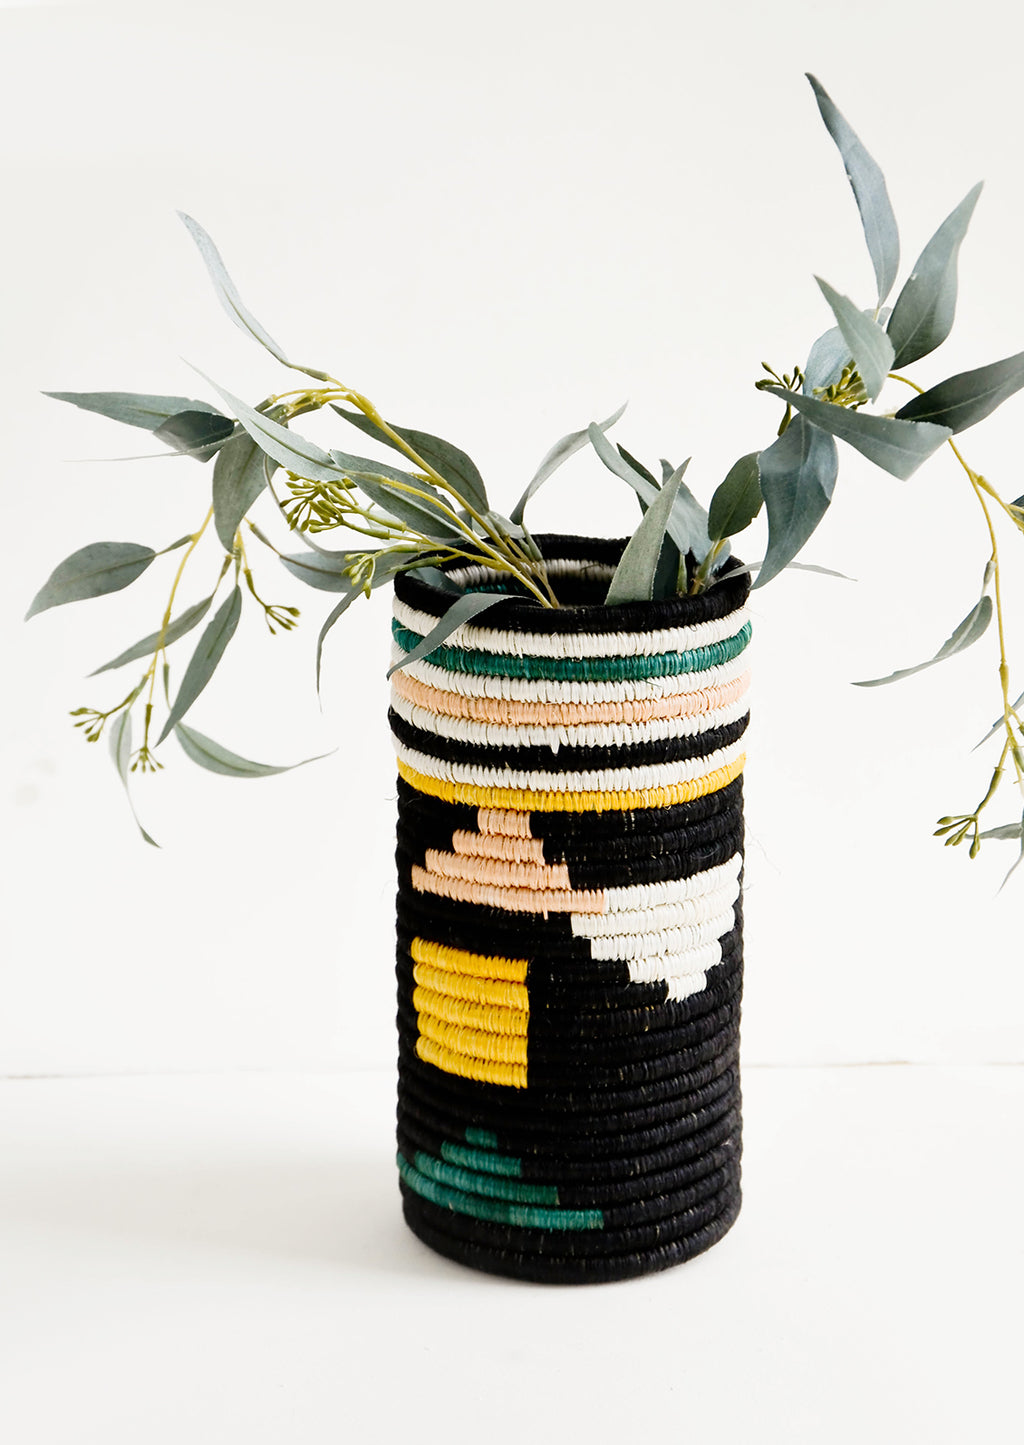 Black Geo Multi: Tall vases made of woven natural grass in colorful geometric pattern, with eucalyptus leaves inside